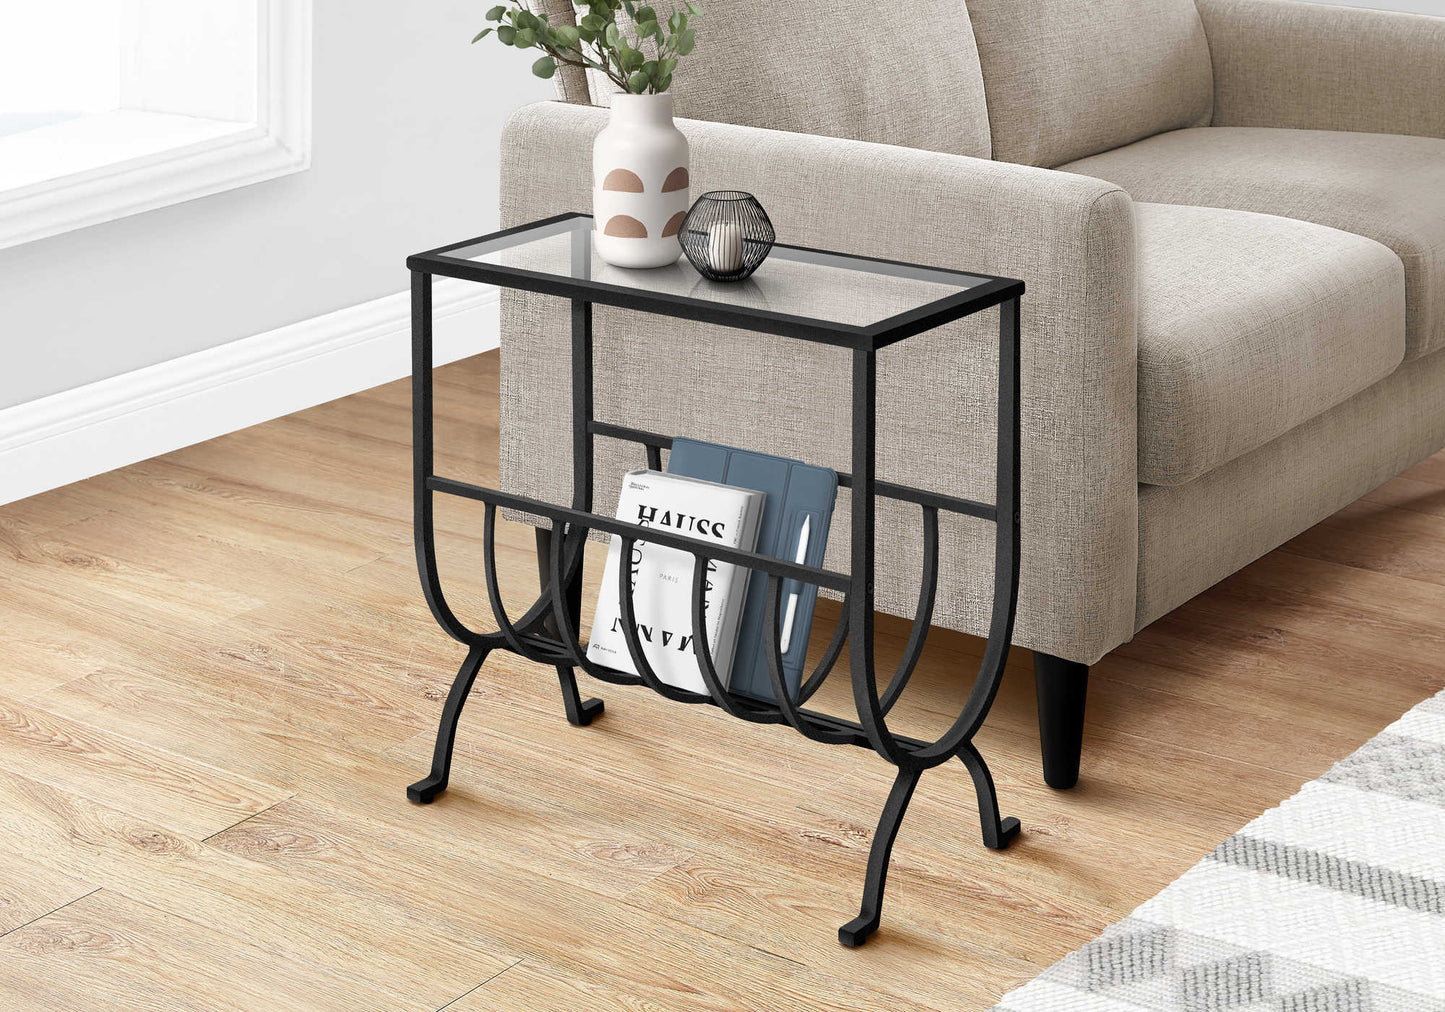 18” L/22” H Transitional Metal End Table with Magazine Rack & Glass